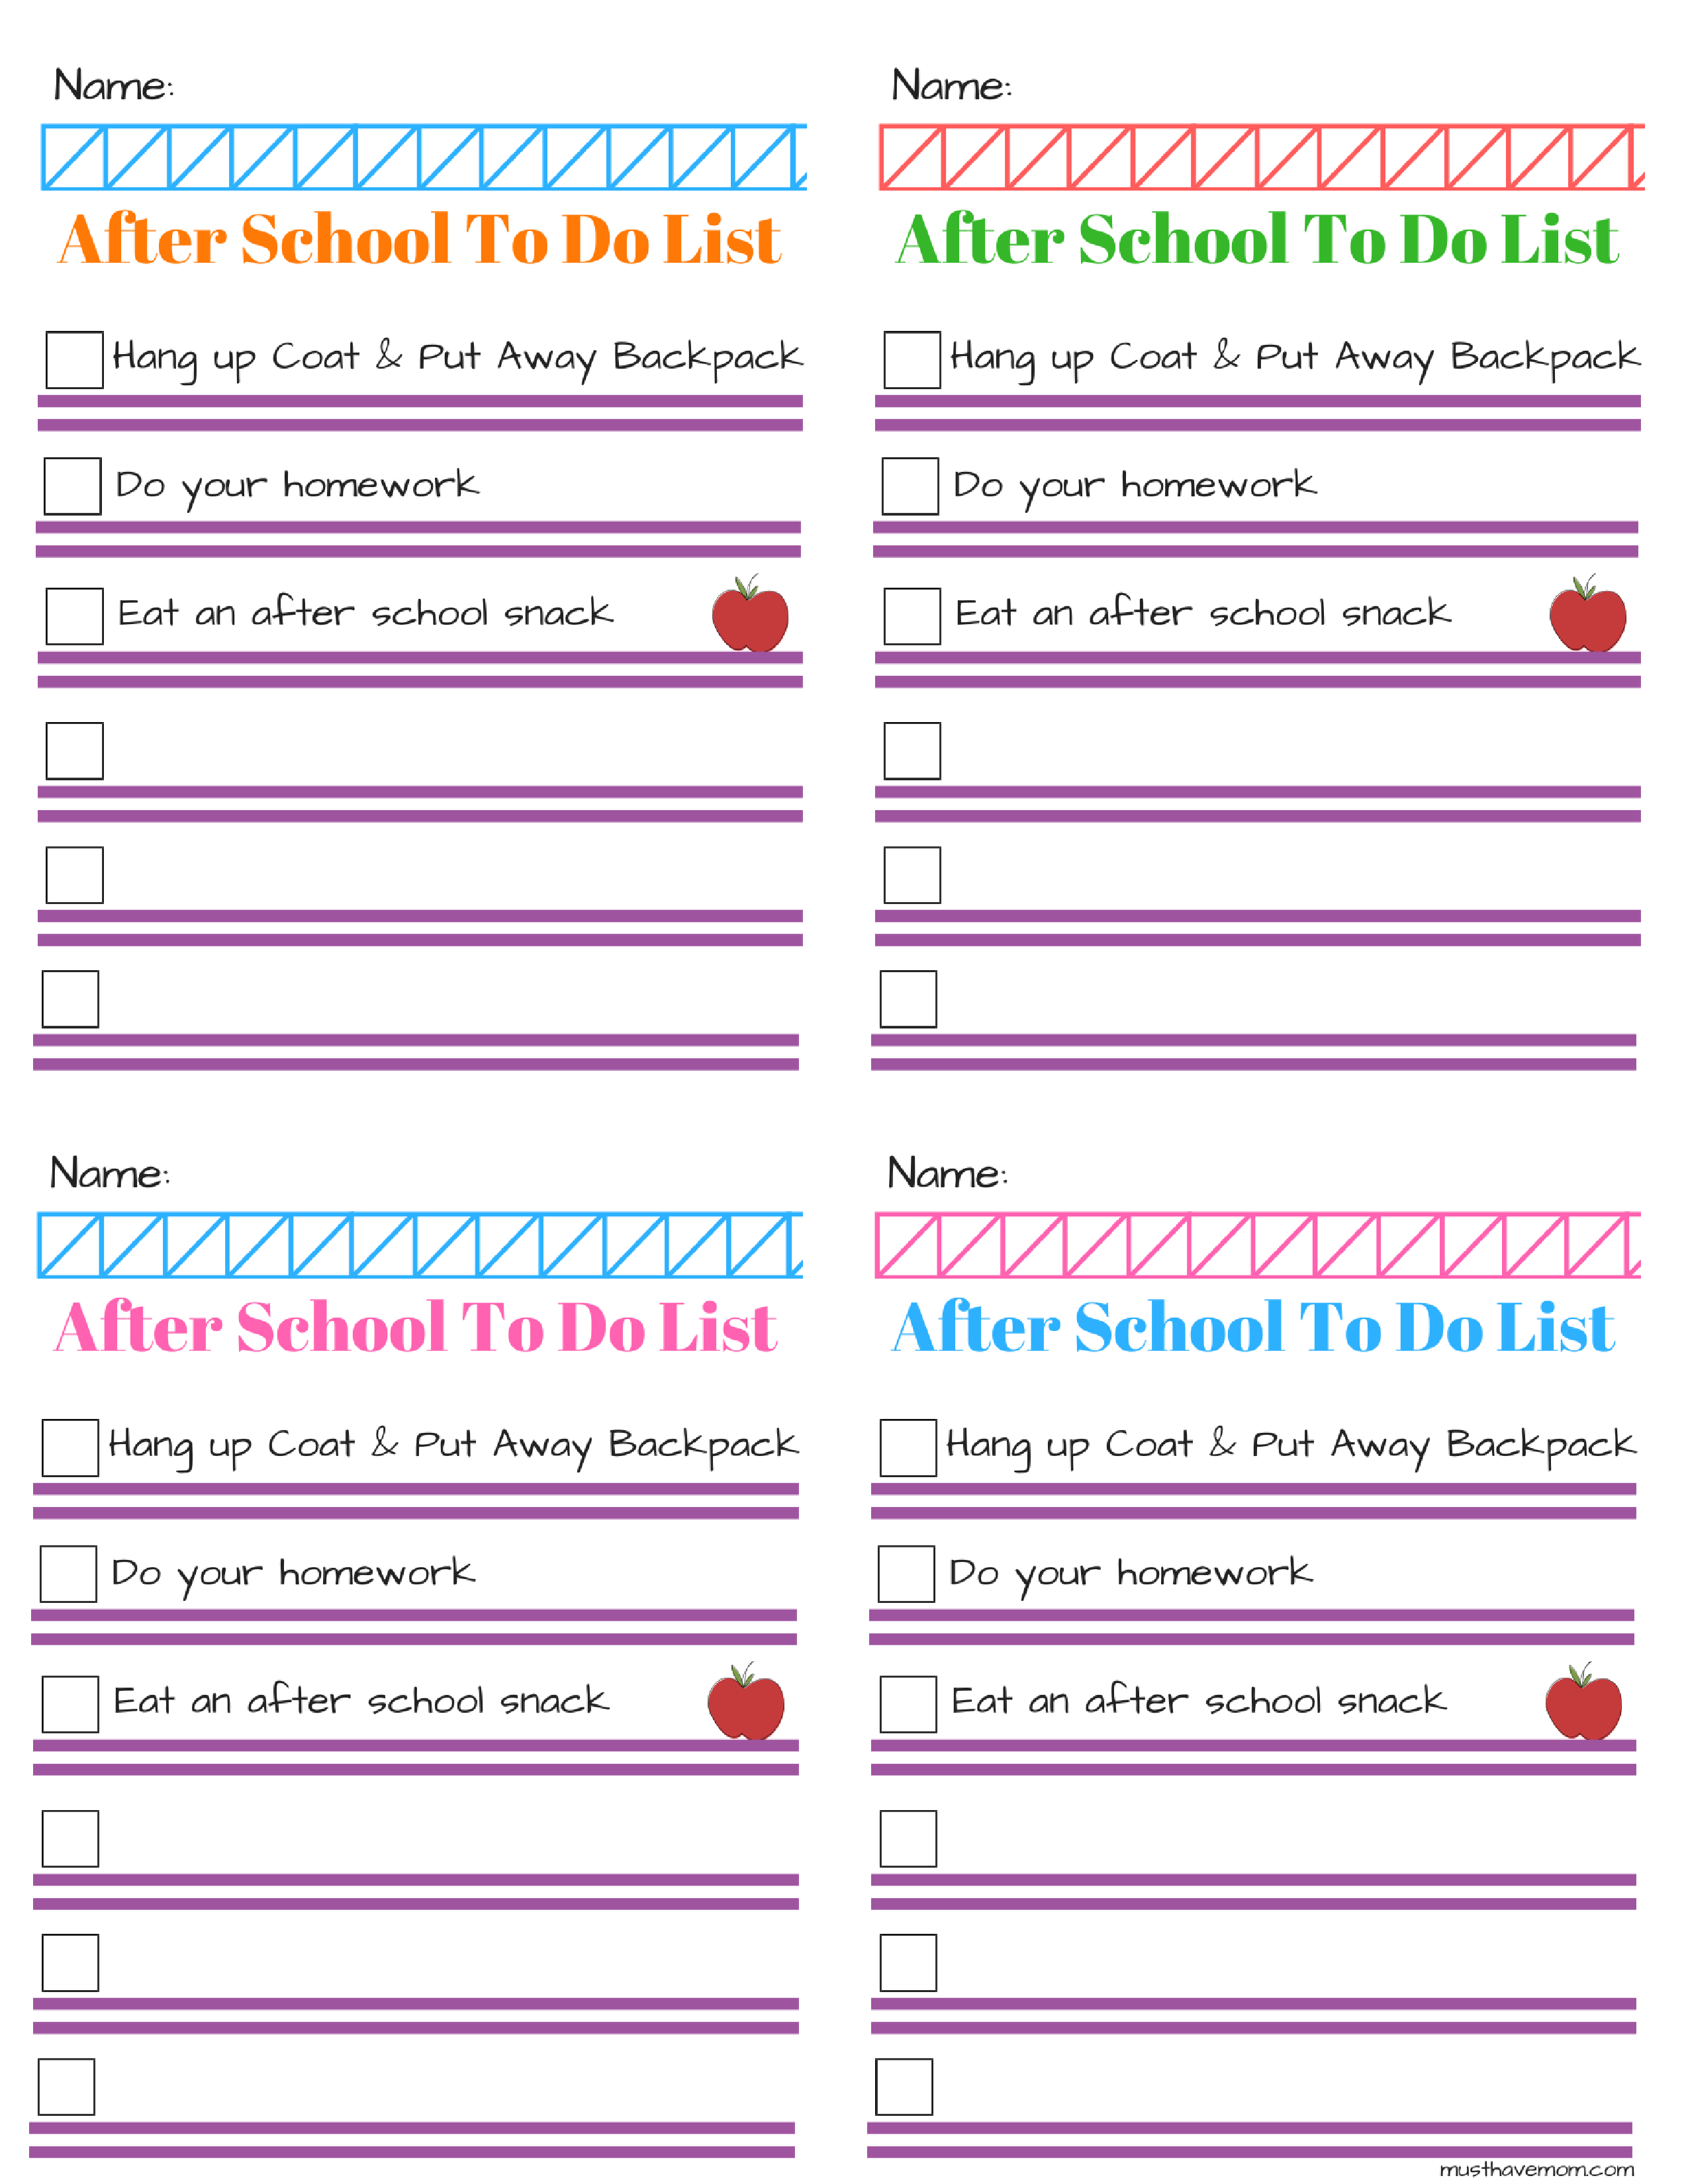 Free After school chore list printable! Each page cuts out into 4 pages to create your own tear pad. Fill in the blanks to customize the tasks they need to complete before playtime or screen time begins!